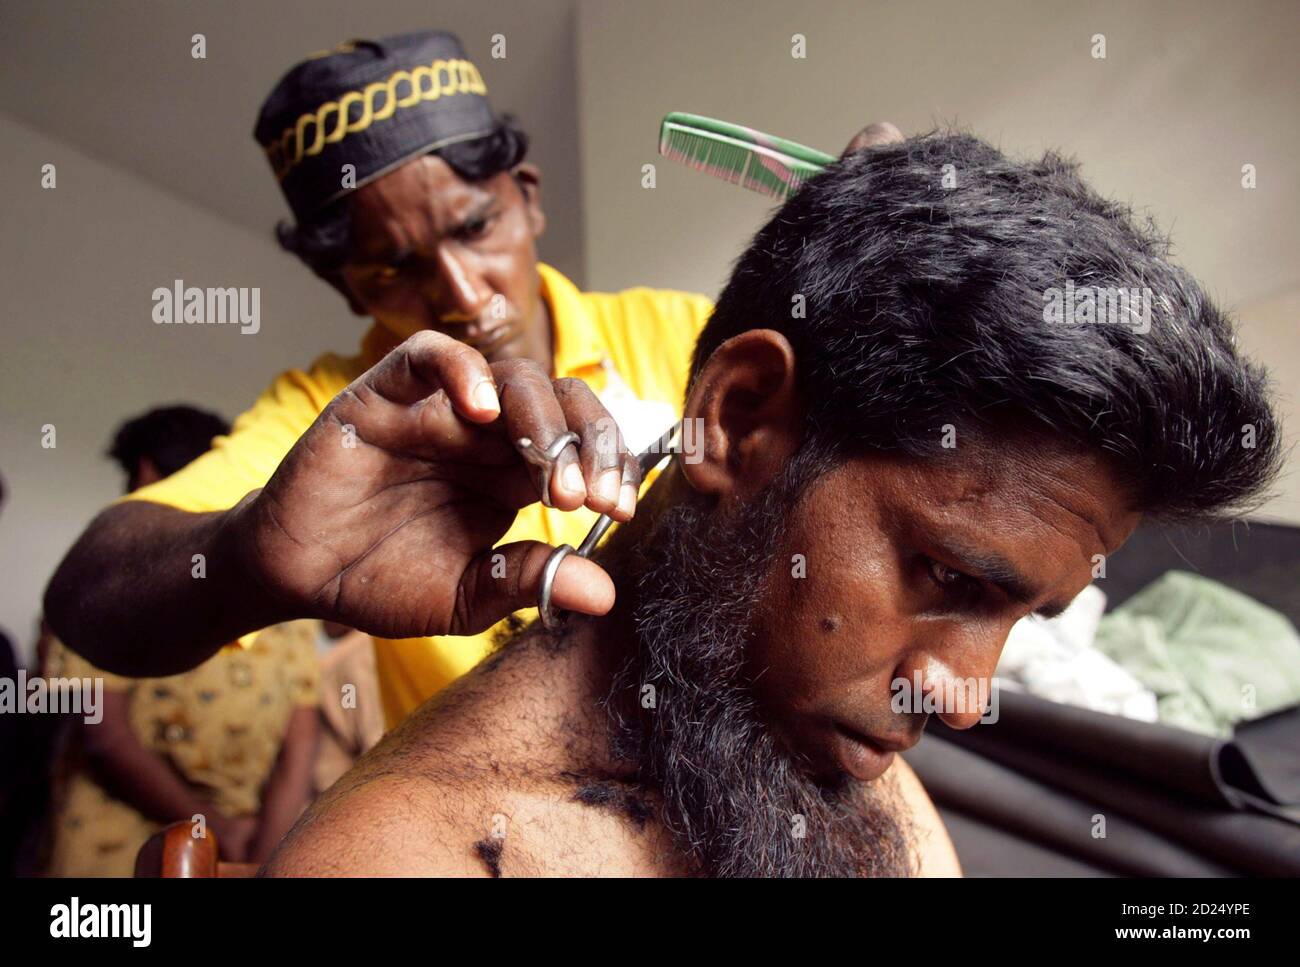 One of the Rohingya boat people, rescued off the coast of Indonesia's Aceh  province, has his hair cut by a friend at a temporary shelter in Idi Rayeuk  February 4, 2009. Indonesian